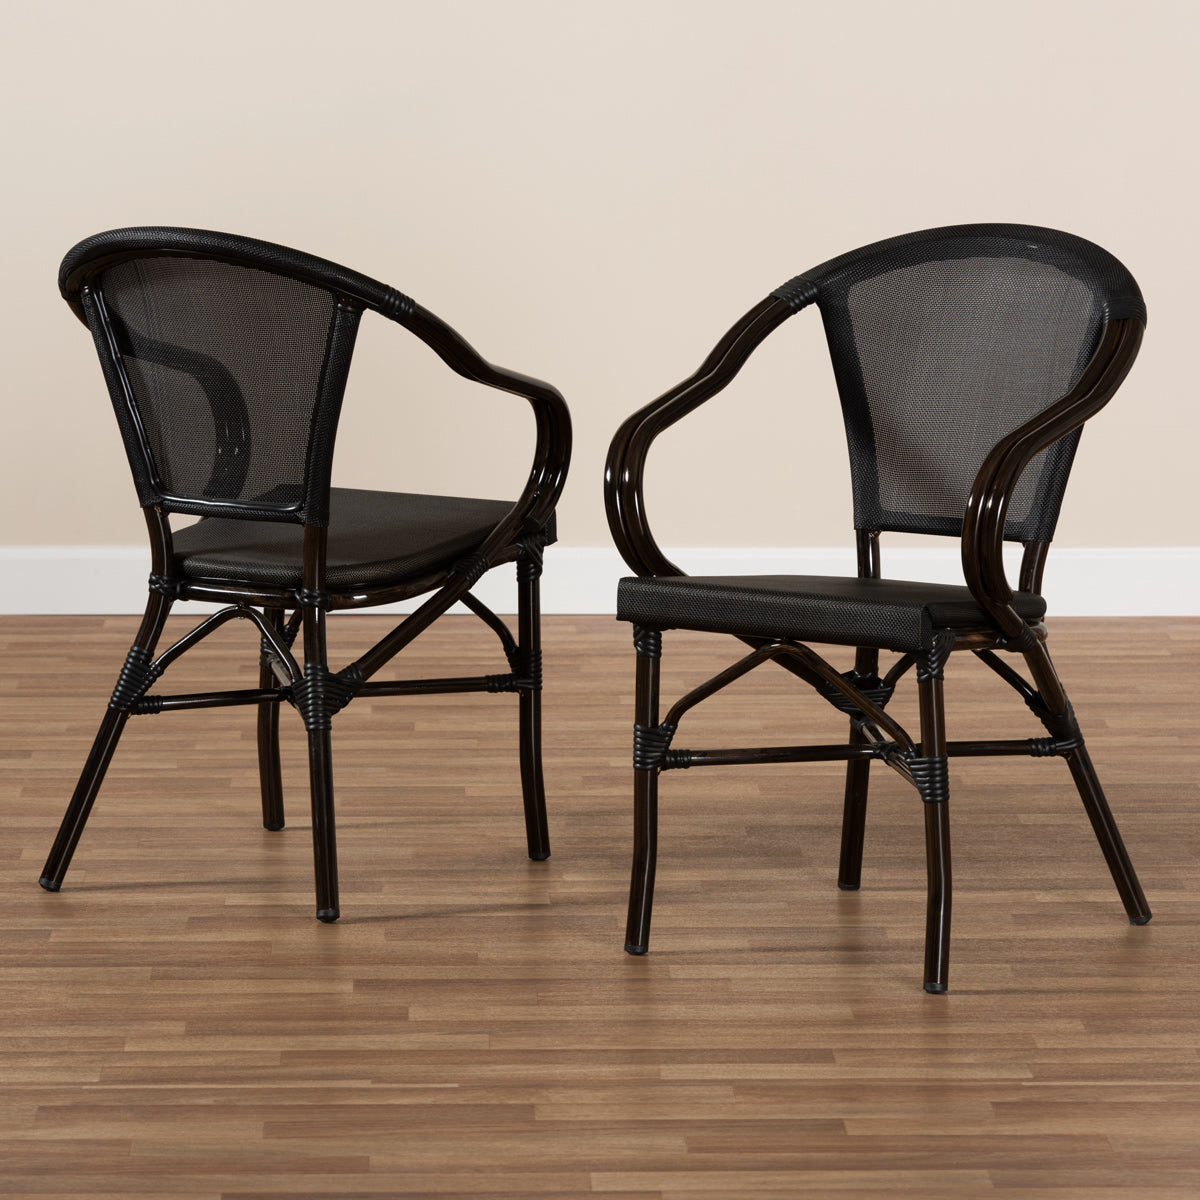 Baxton Studio Artus Classic French Indoor and Outdoor Black Bamboo Style Stackable Bistro Dining Chair Set of 2 Baxton Studio-dining chair-Minimal And Modern - 7